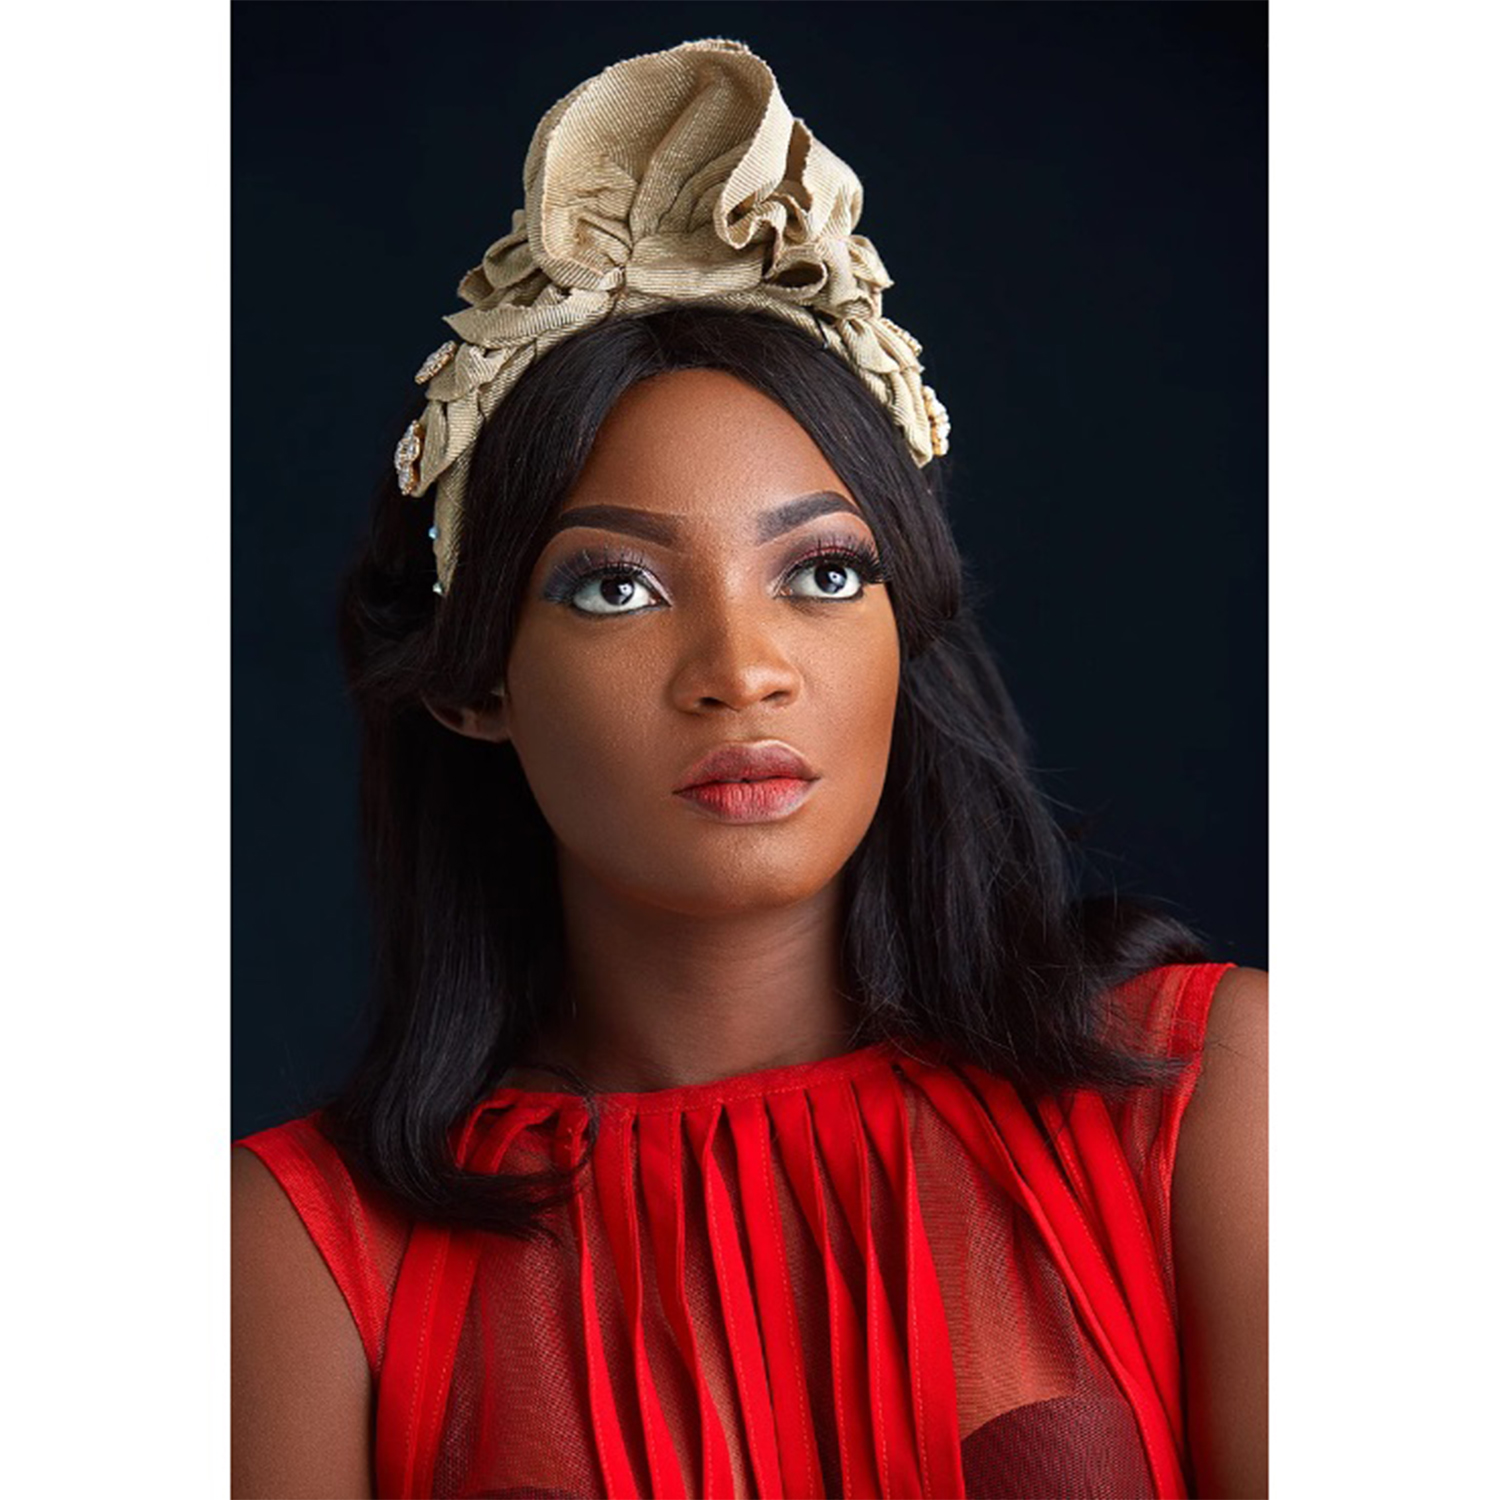 couture-accessories-brand-sissy-remi-unveils-latest-avant-garde-collection-tagged-prima-donna-lookbook